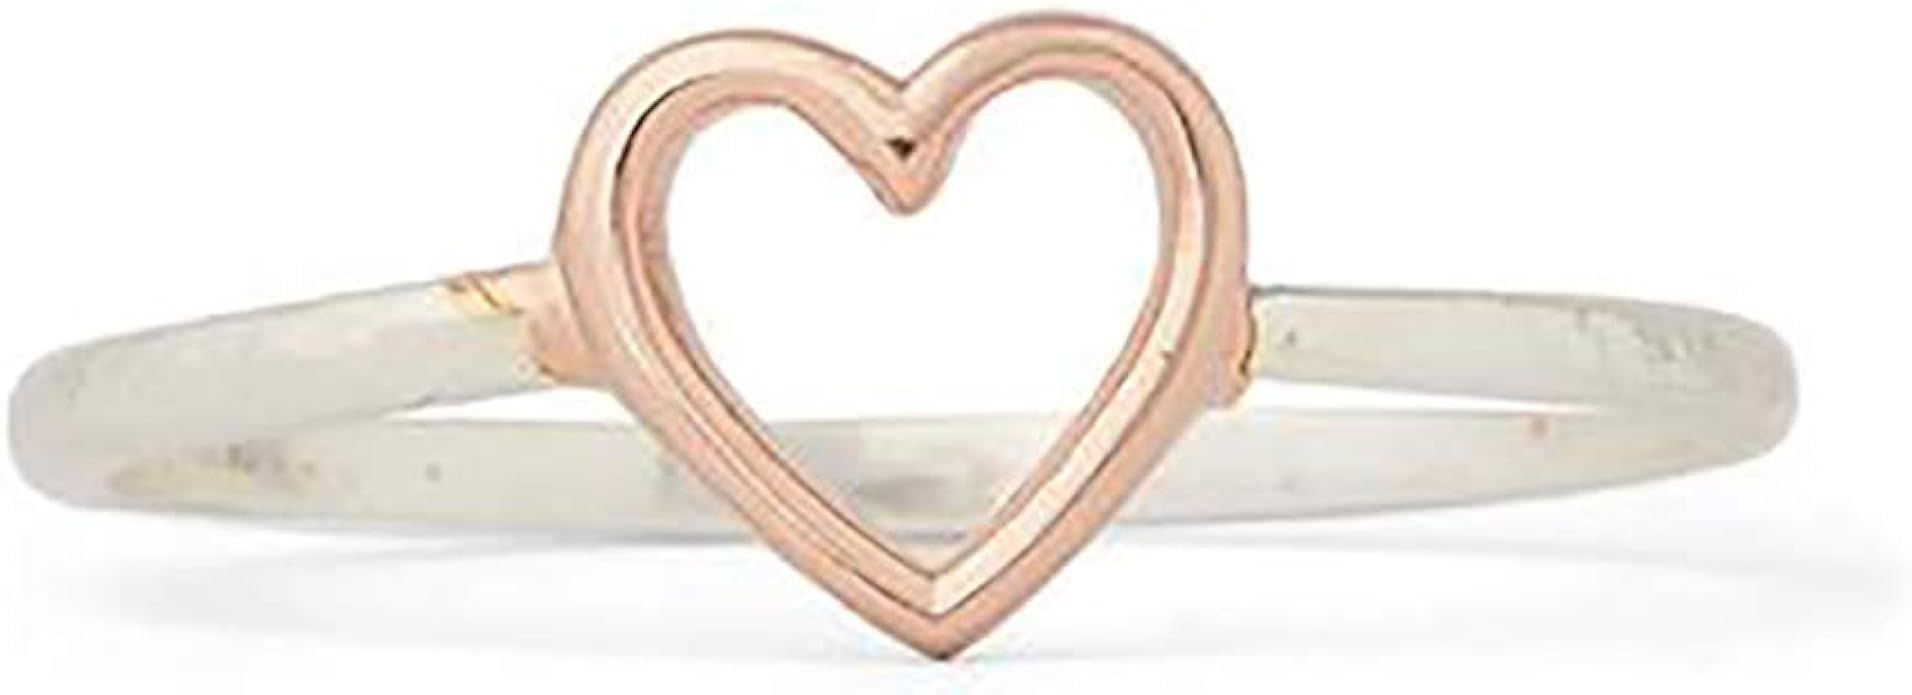 Pura Vida Silver-Plated Open Heart Ring - .925 Sterling Silver Band, Sizes 5-9 | Amazon (US)